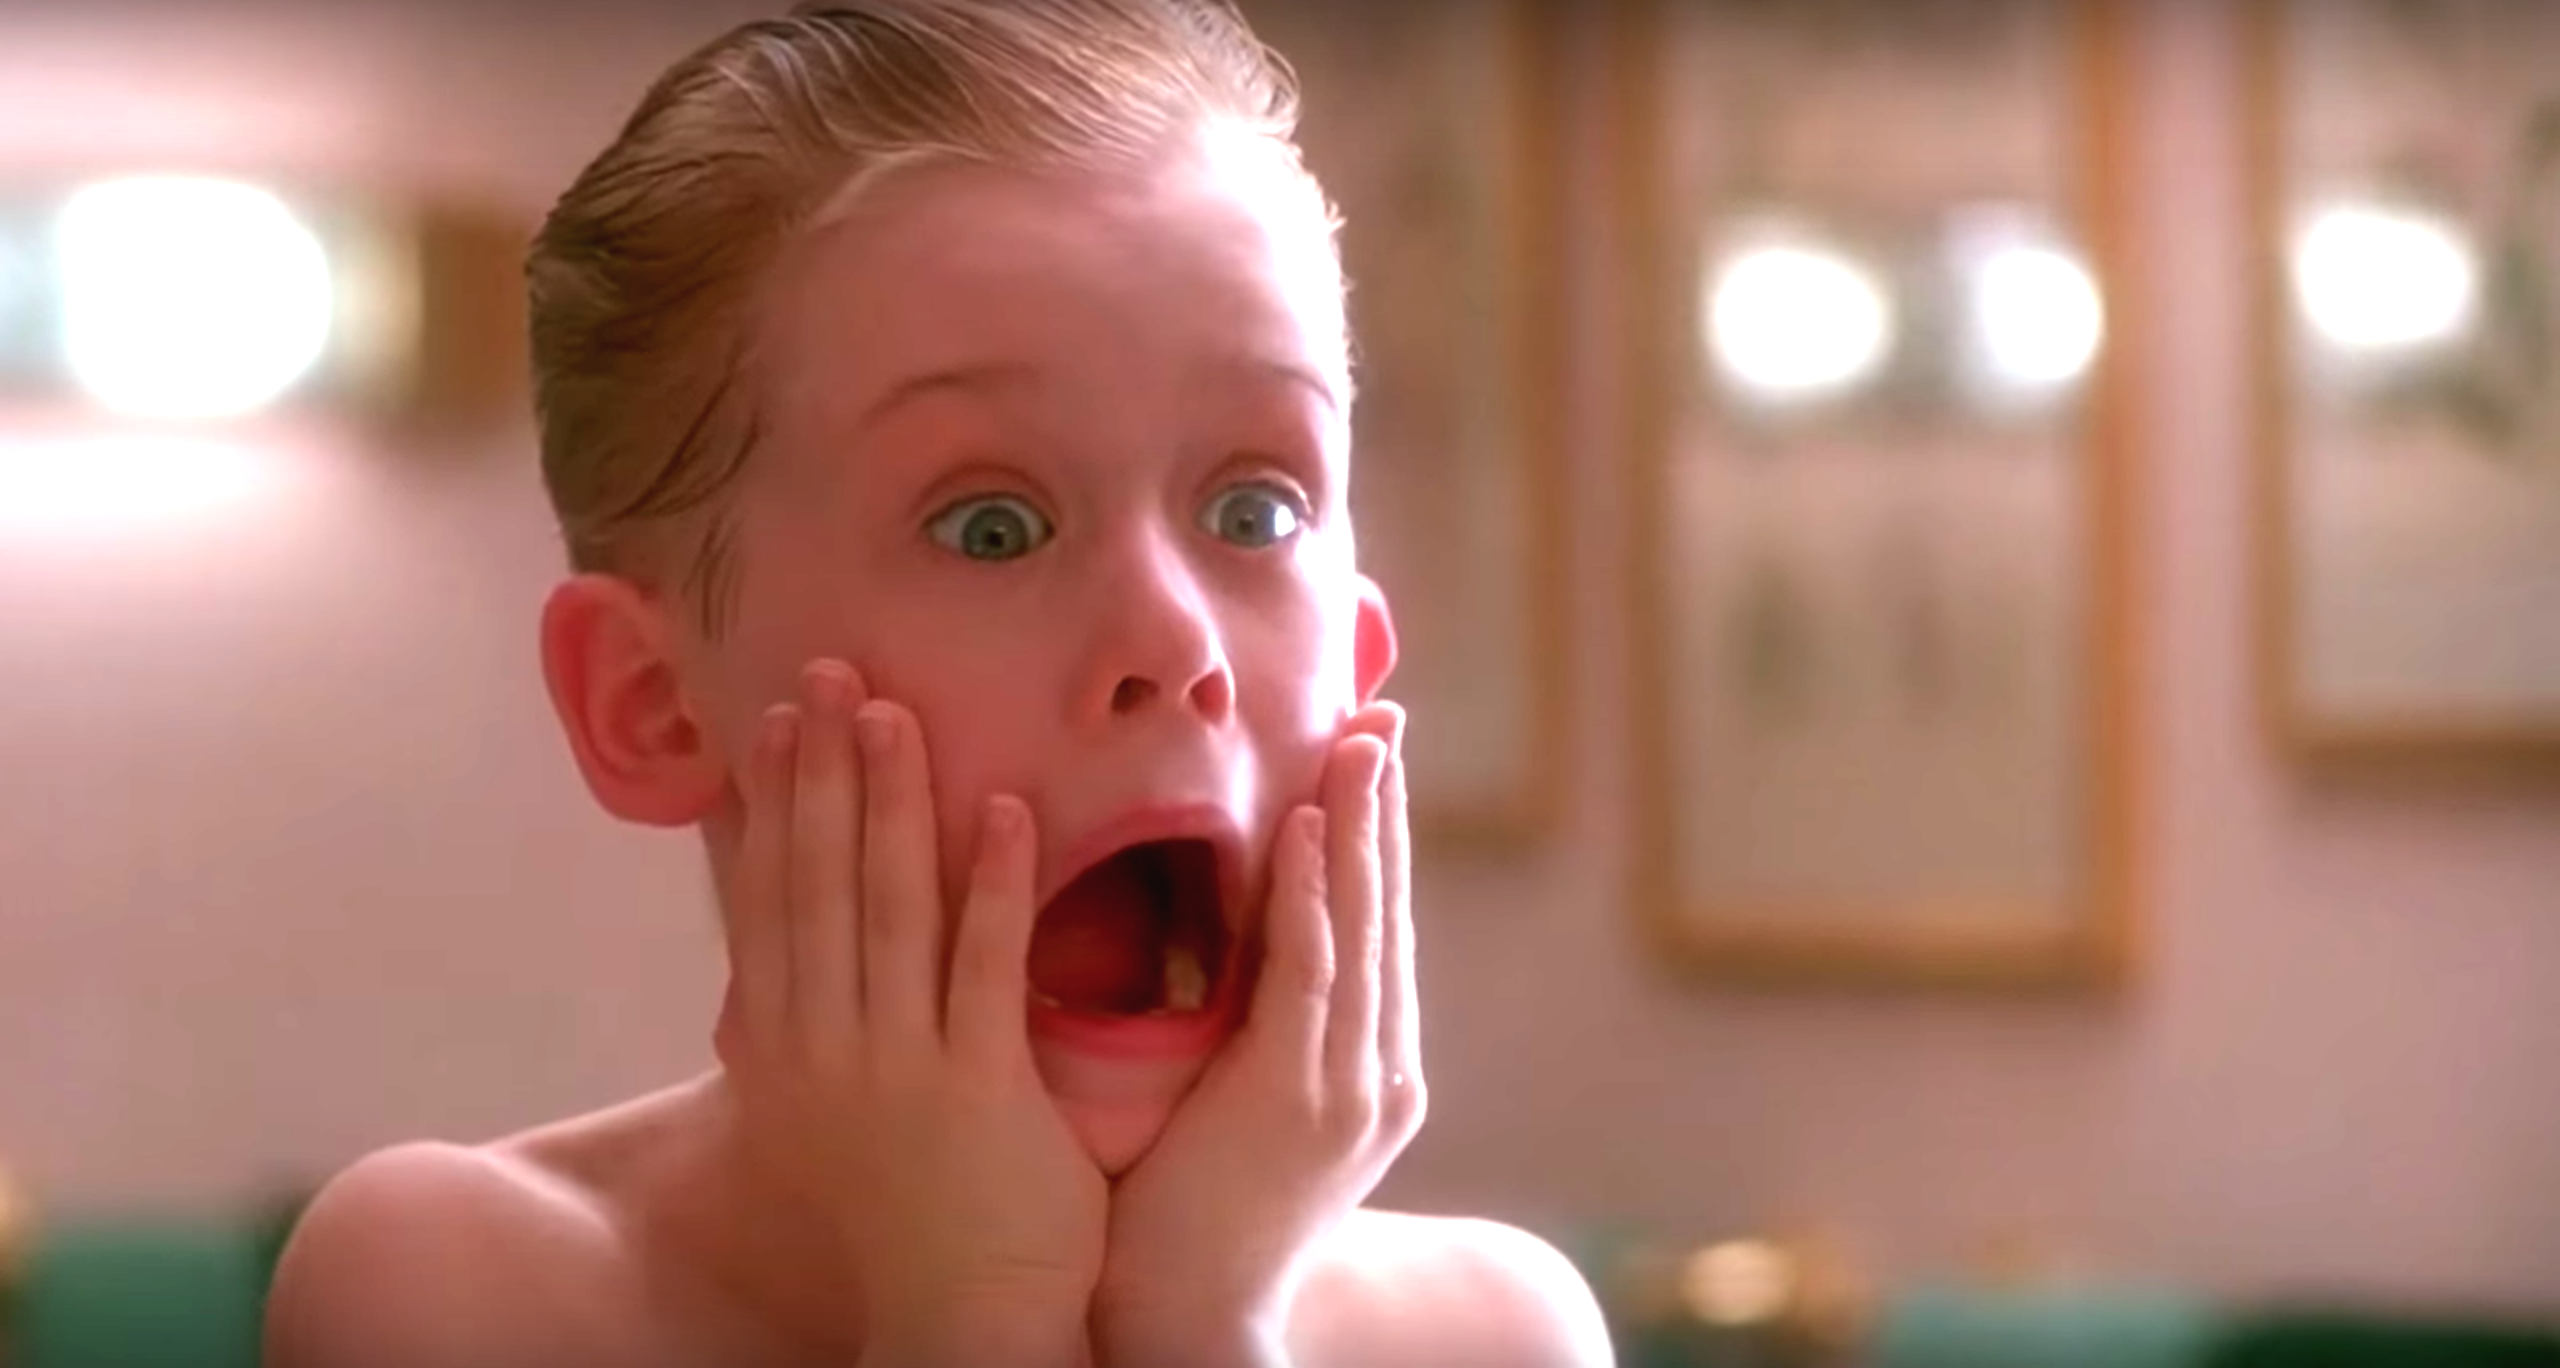 movies ruined with sex scenes - Home Alone